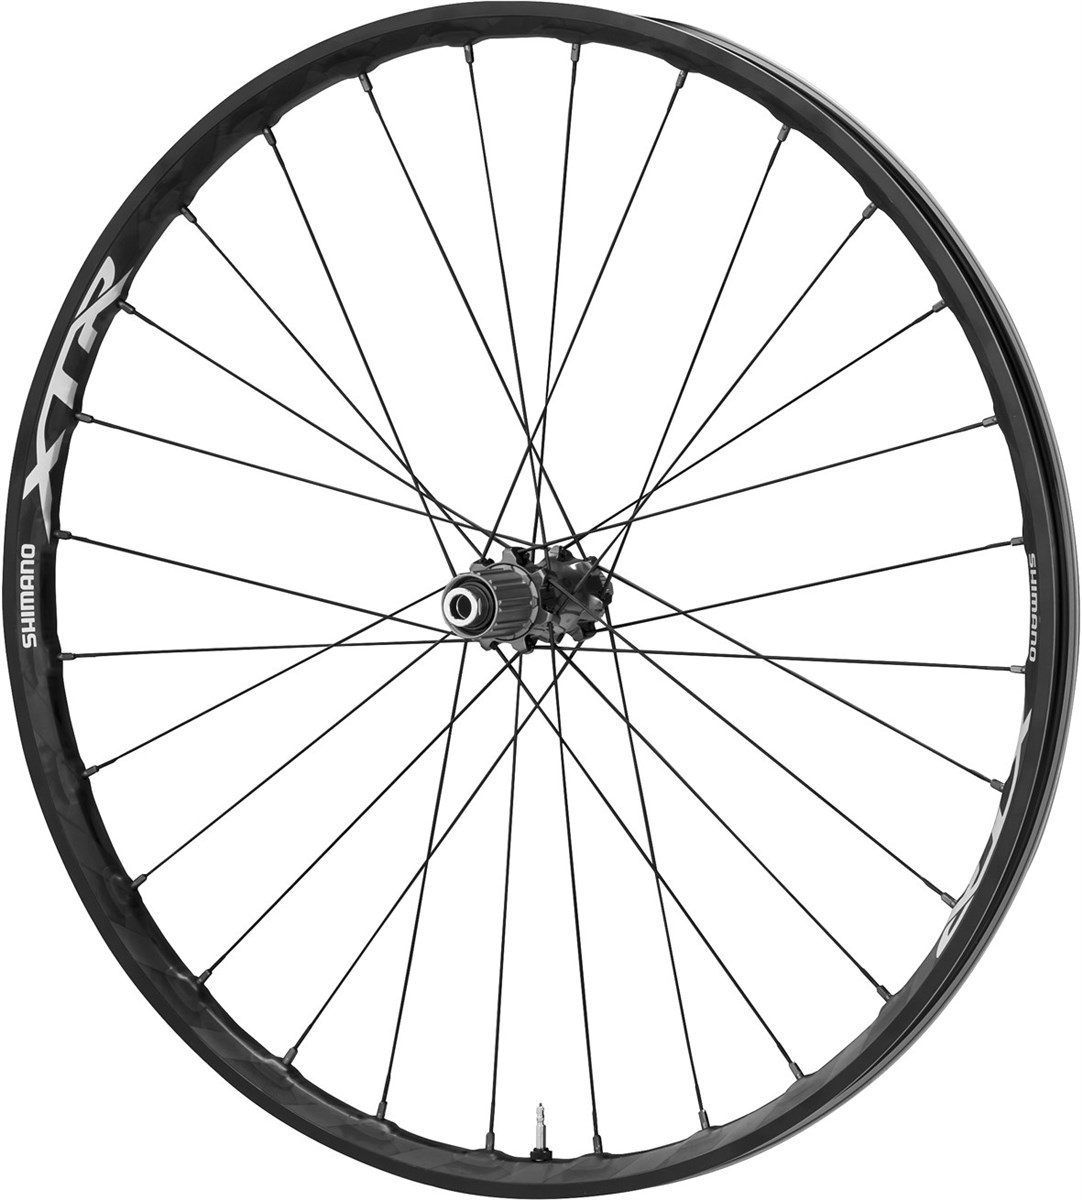 Shimano XTR Trail Wheel 12 x 142mm 27.5 Carbon Clincher product image